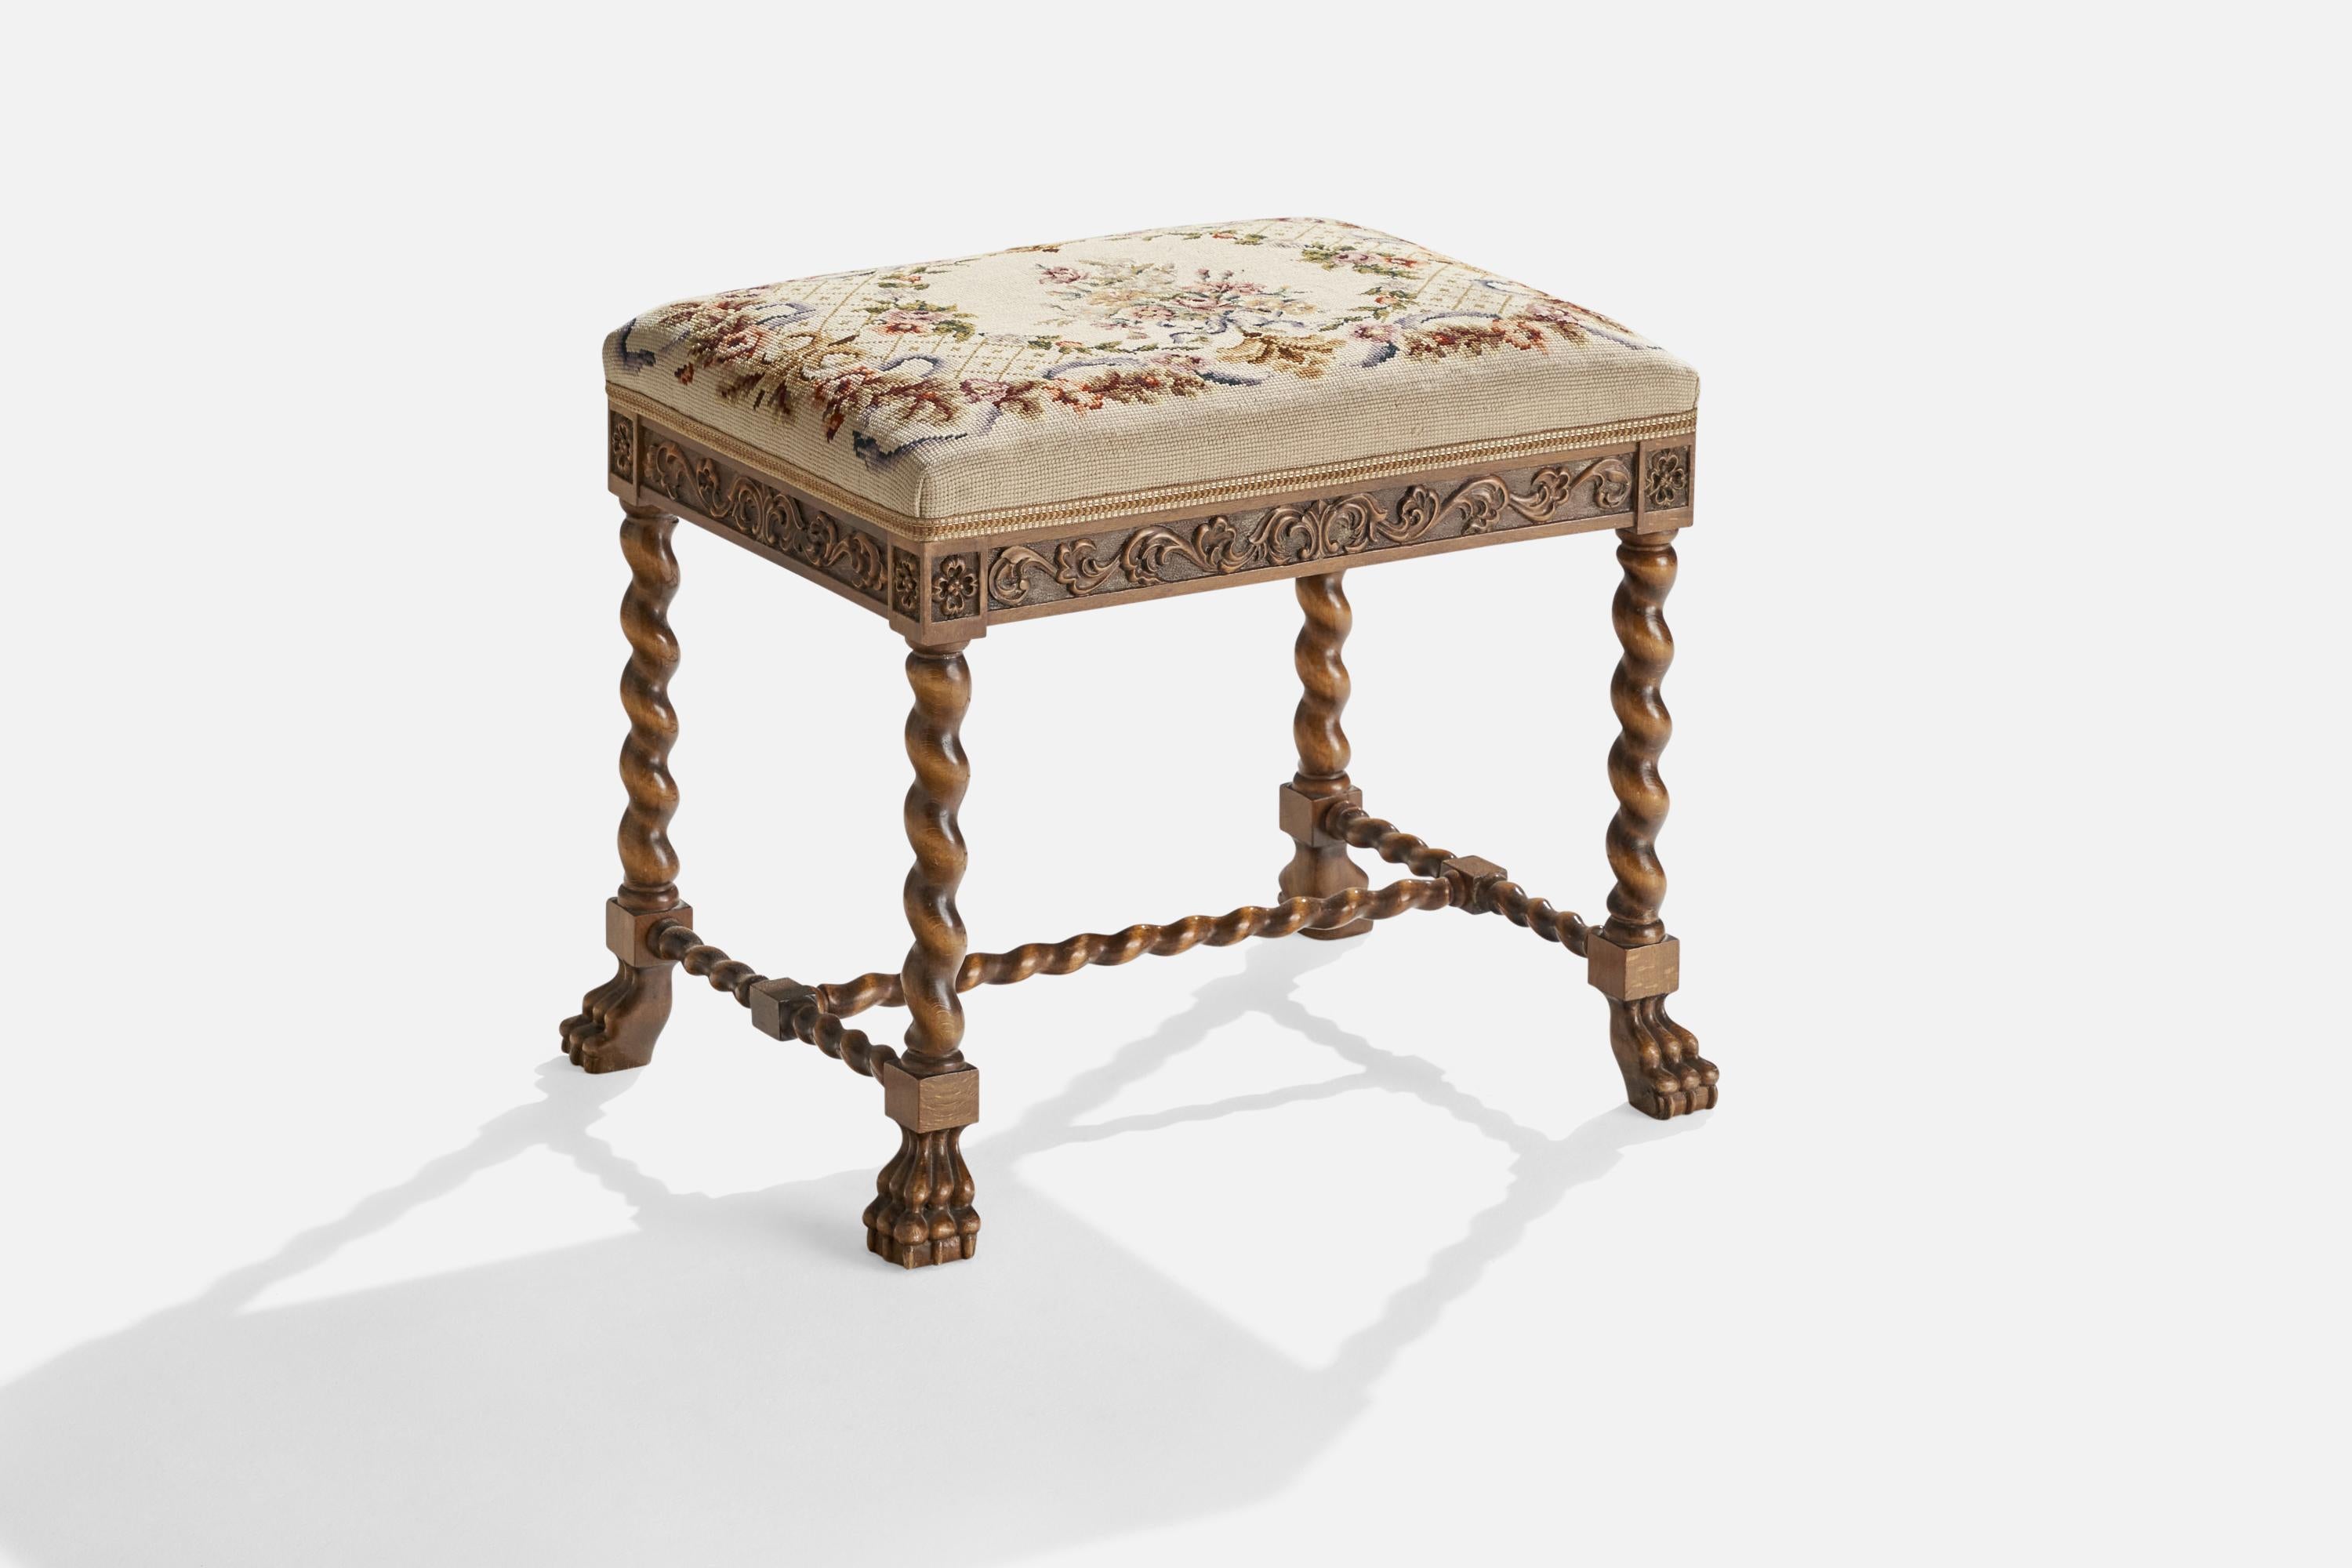 A birch and floral motif hand-embroidered fabric stool designed and produced in Sweden, c. 1920s.

Seat height 18”